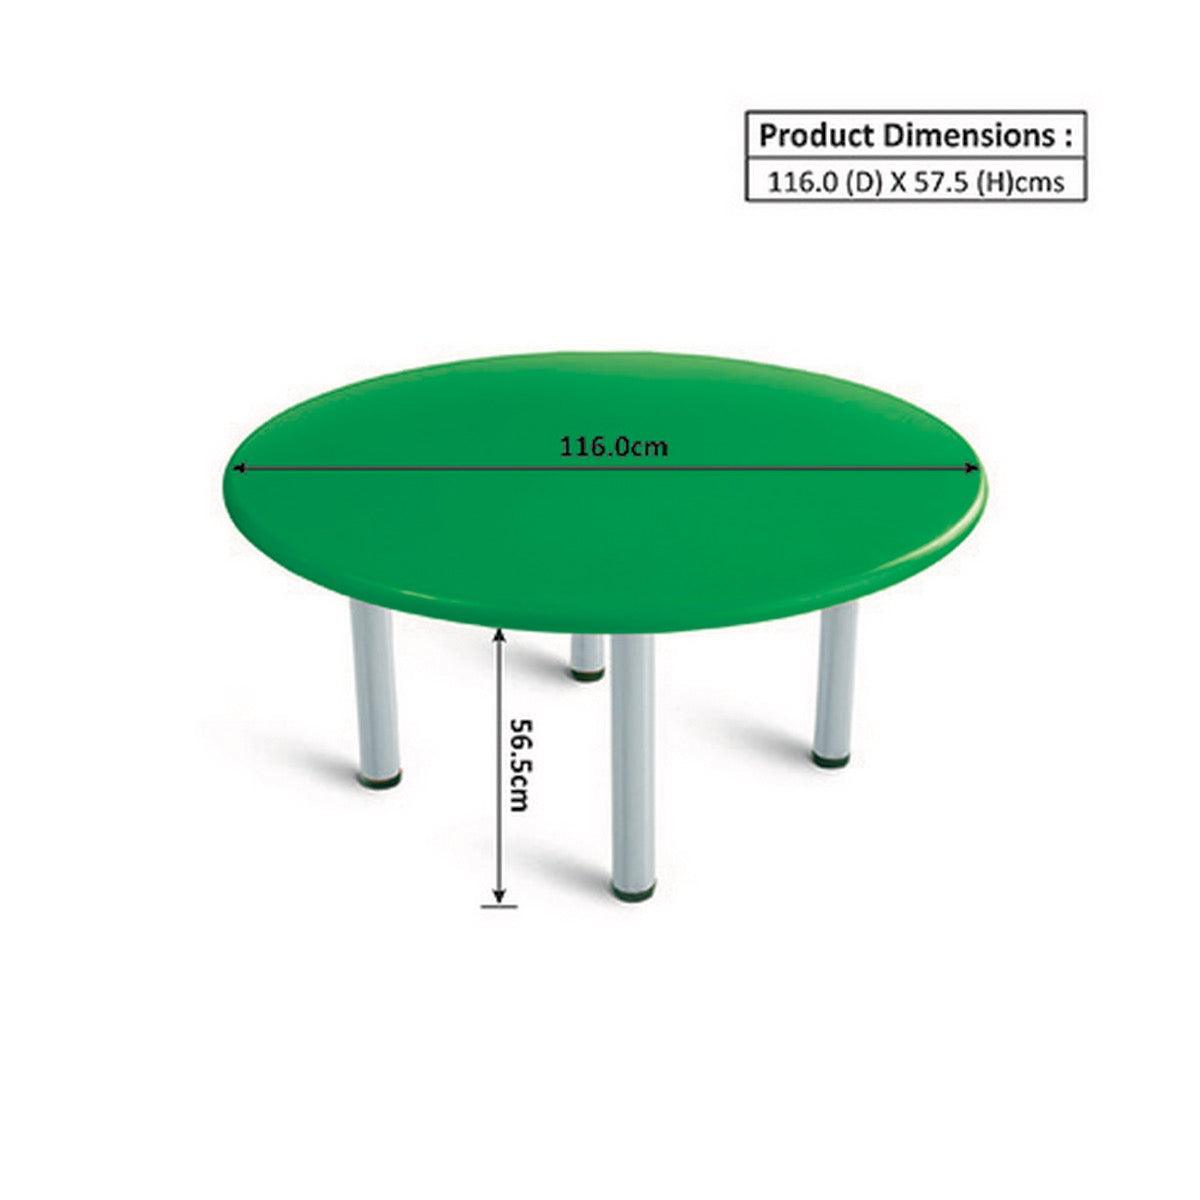 Ok Play Round Table For Kids, Round And Smooth Edges For The Safety, Perfect For Home And School, Green, 2 to 4 Years